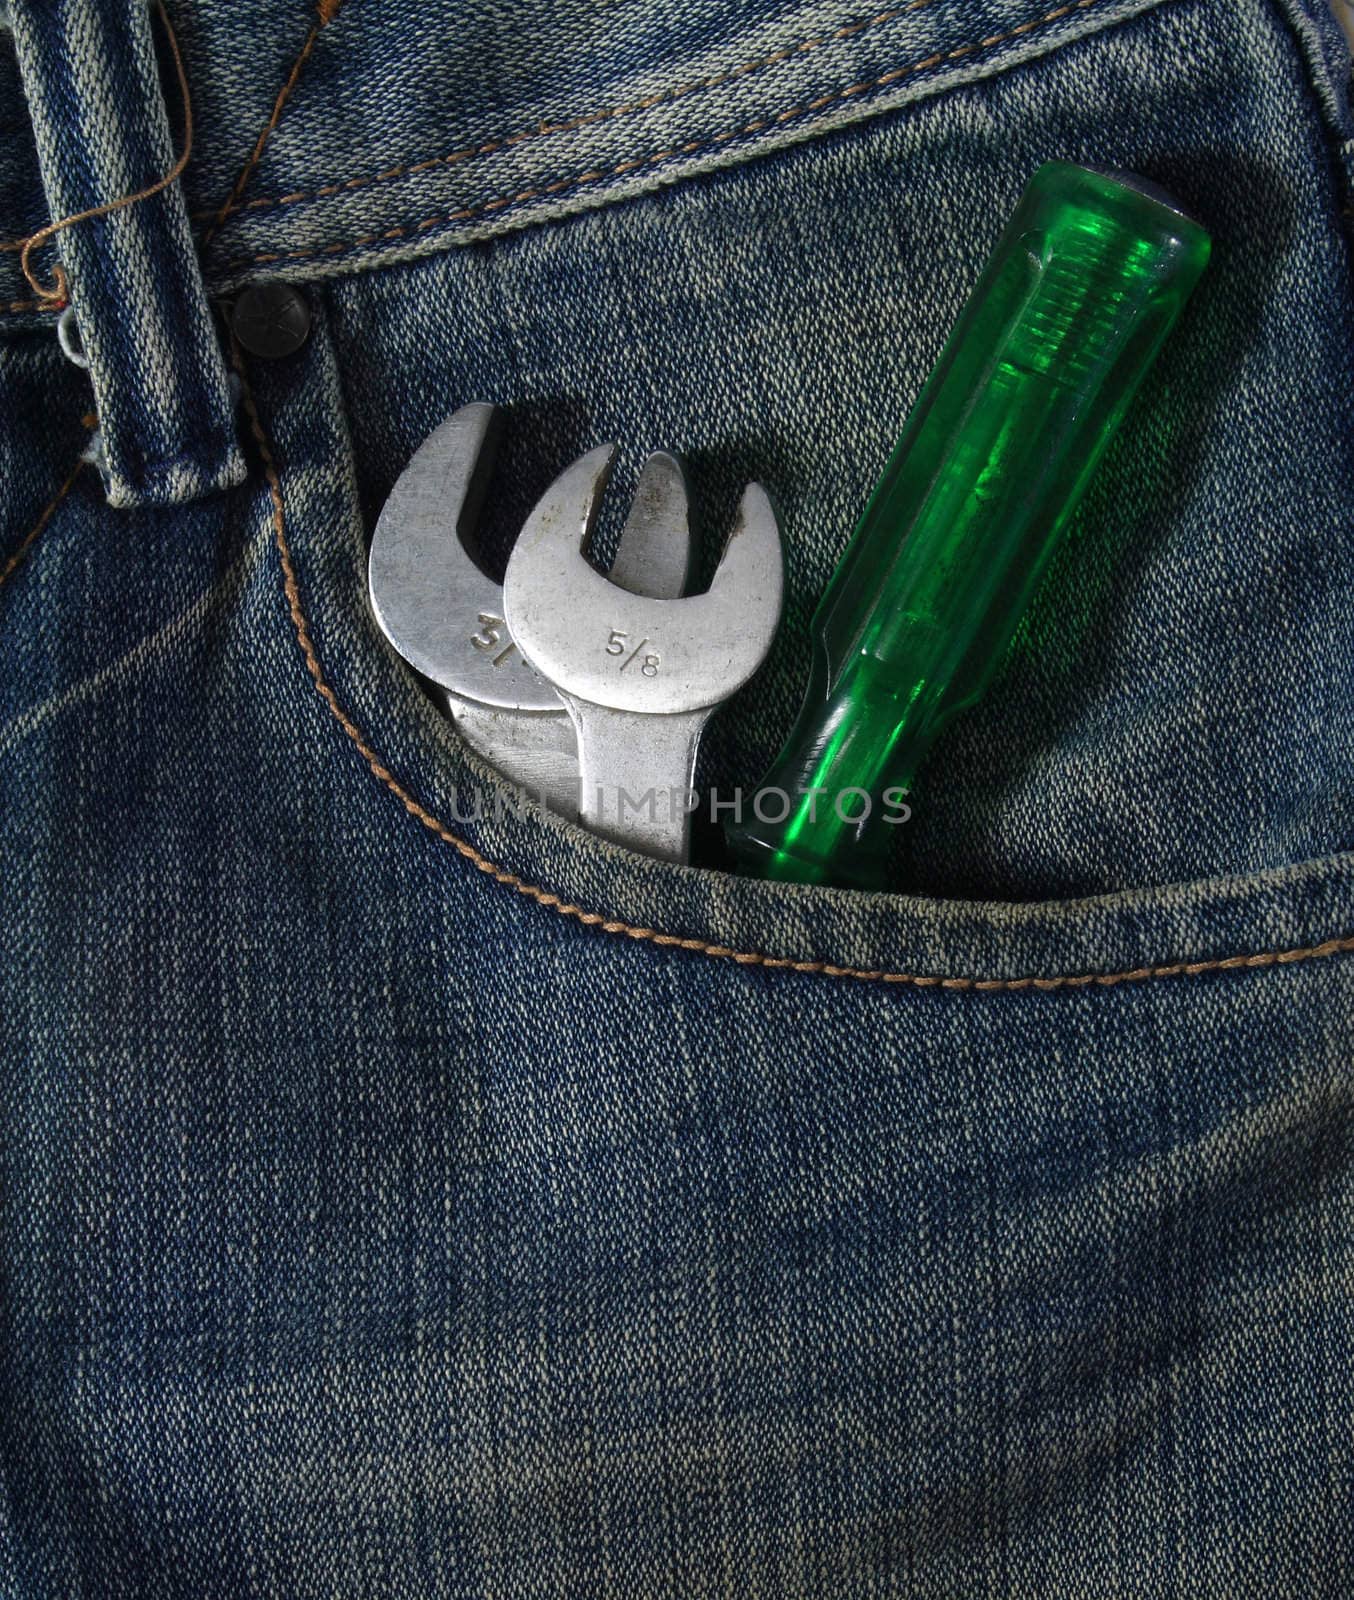 Blue jean pocket with spanners and screwdriver